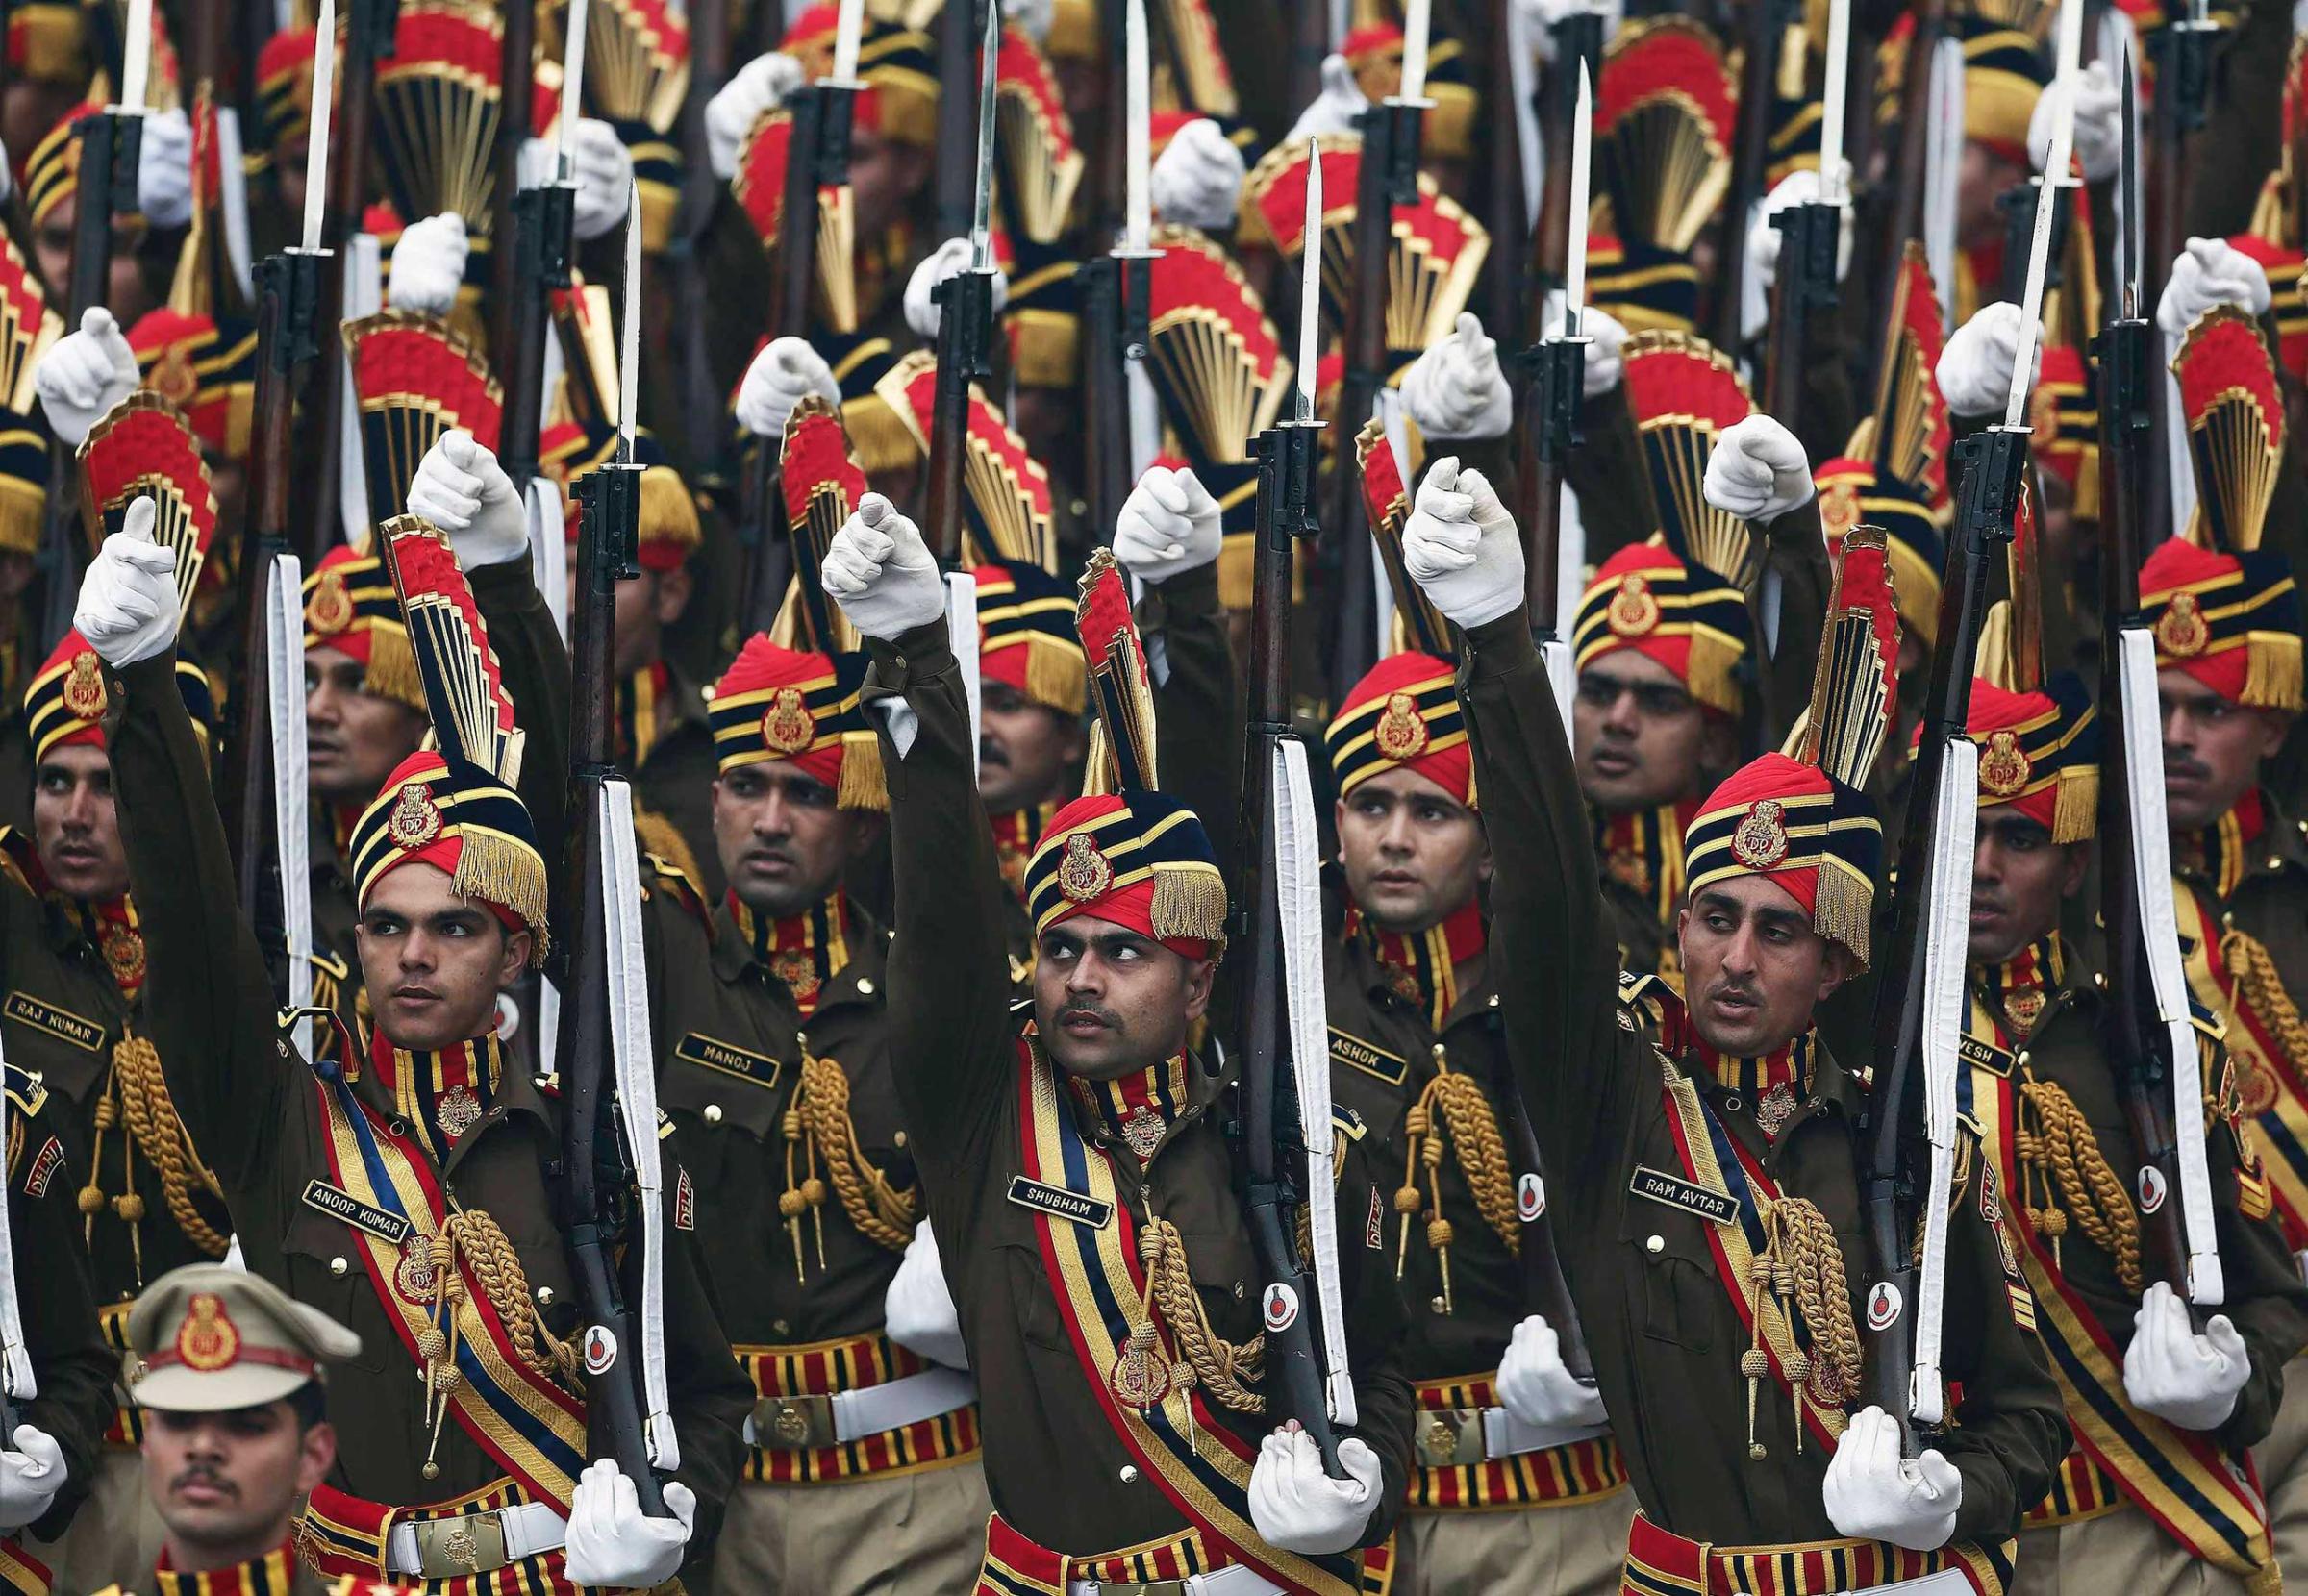 Indian policemen march during the Republic Day parade in New Delhi, Jan. 26, 2015.